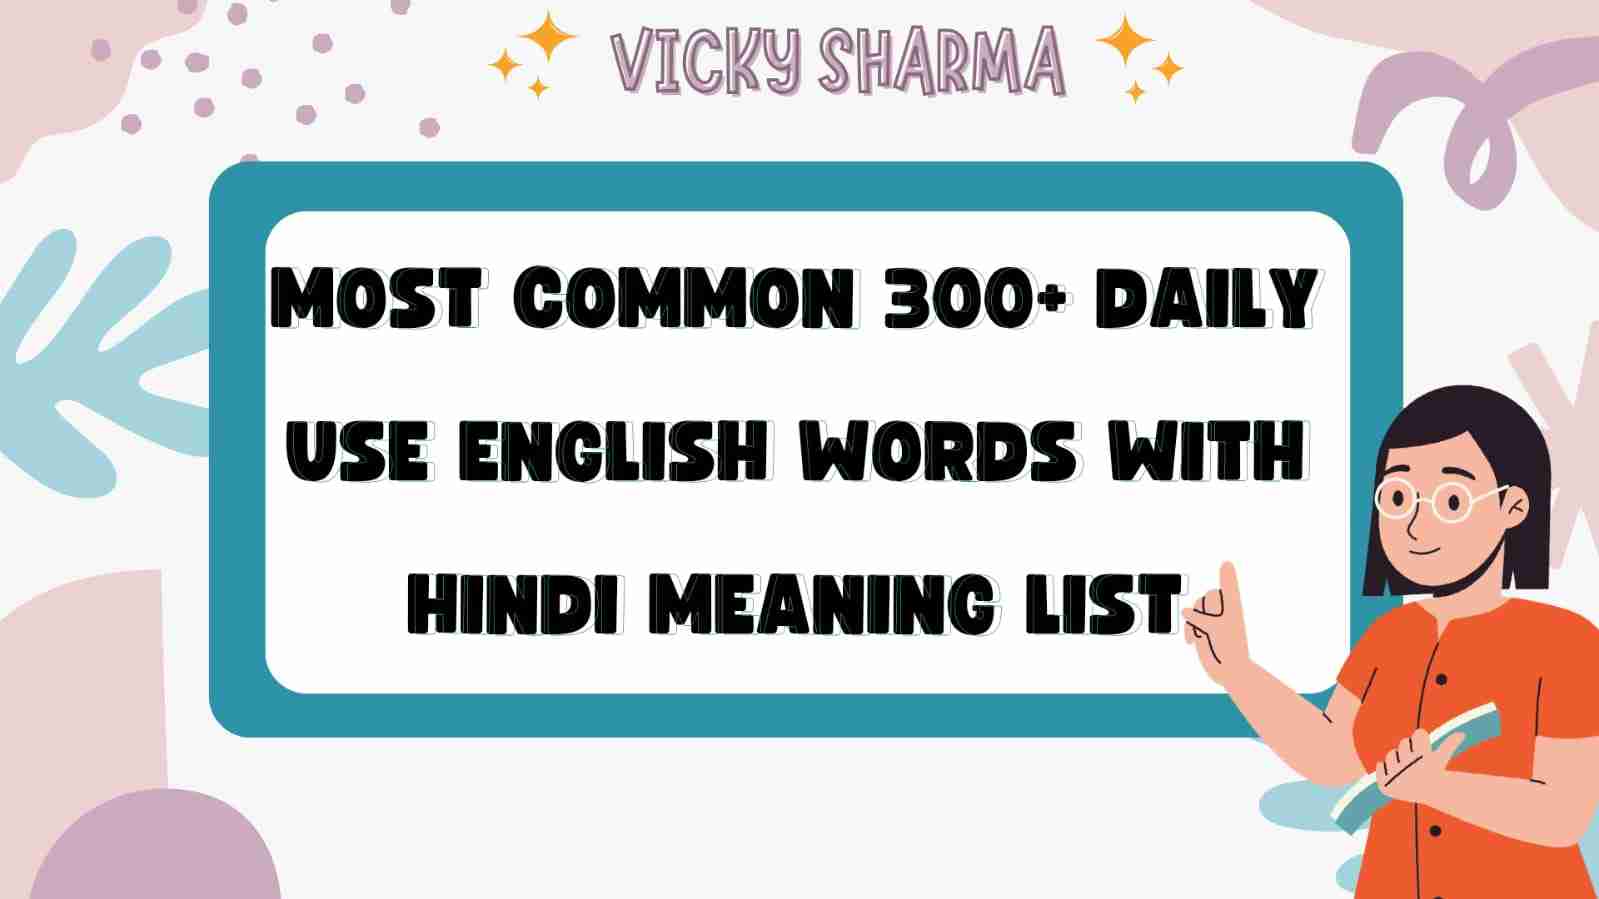 Daily Use English Words With Hindi Meaning